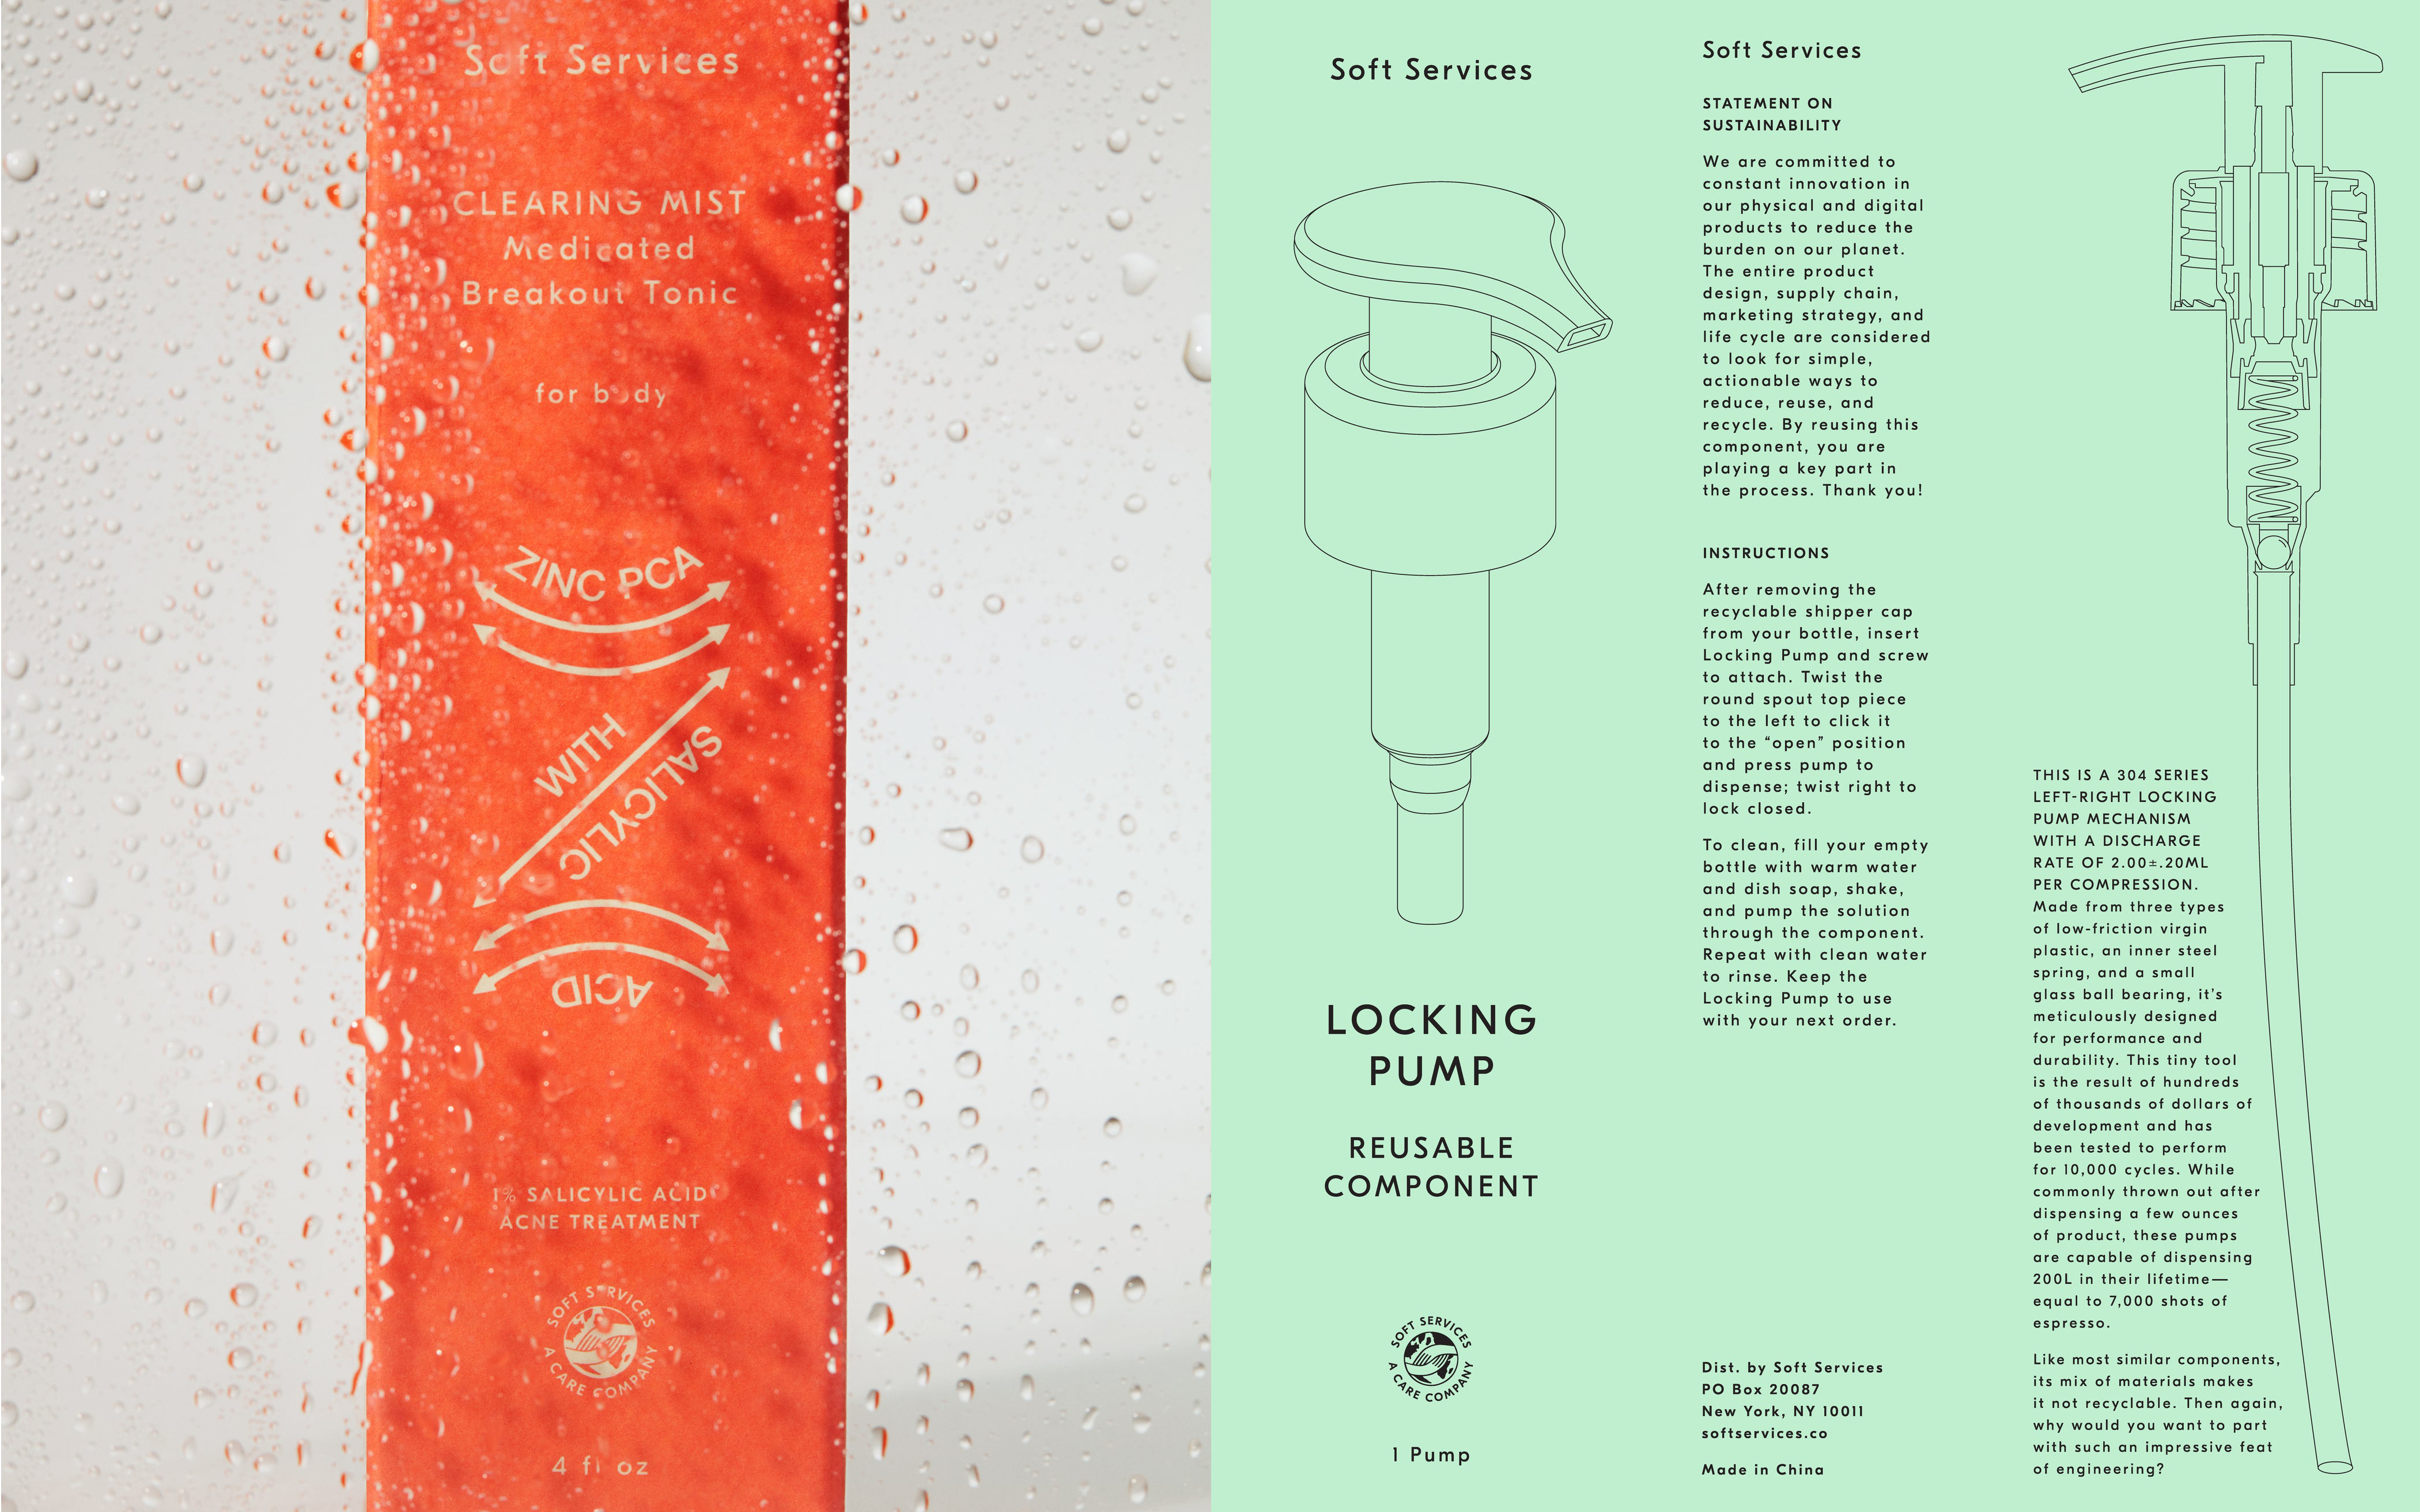 Box packaging design by Decade for New York-based skincare brand Soft Services